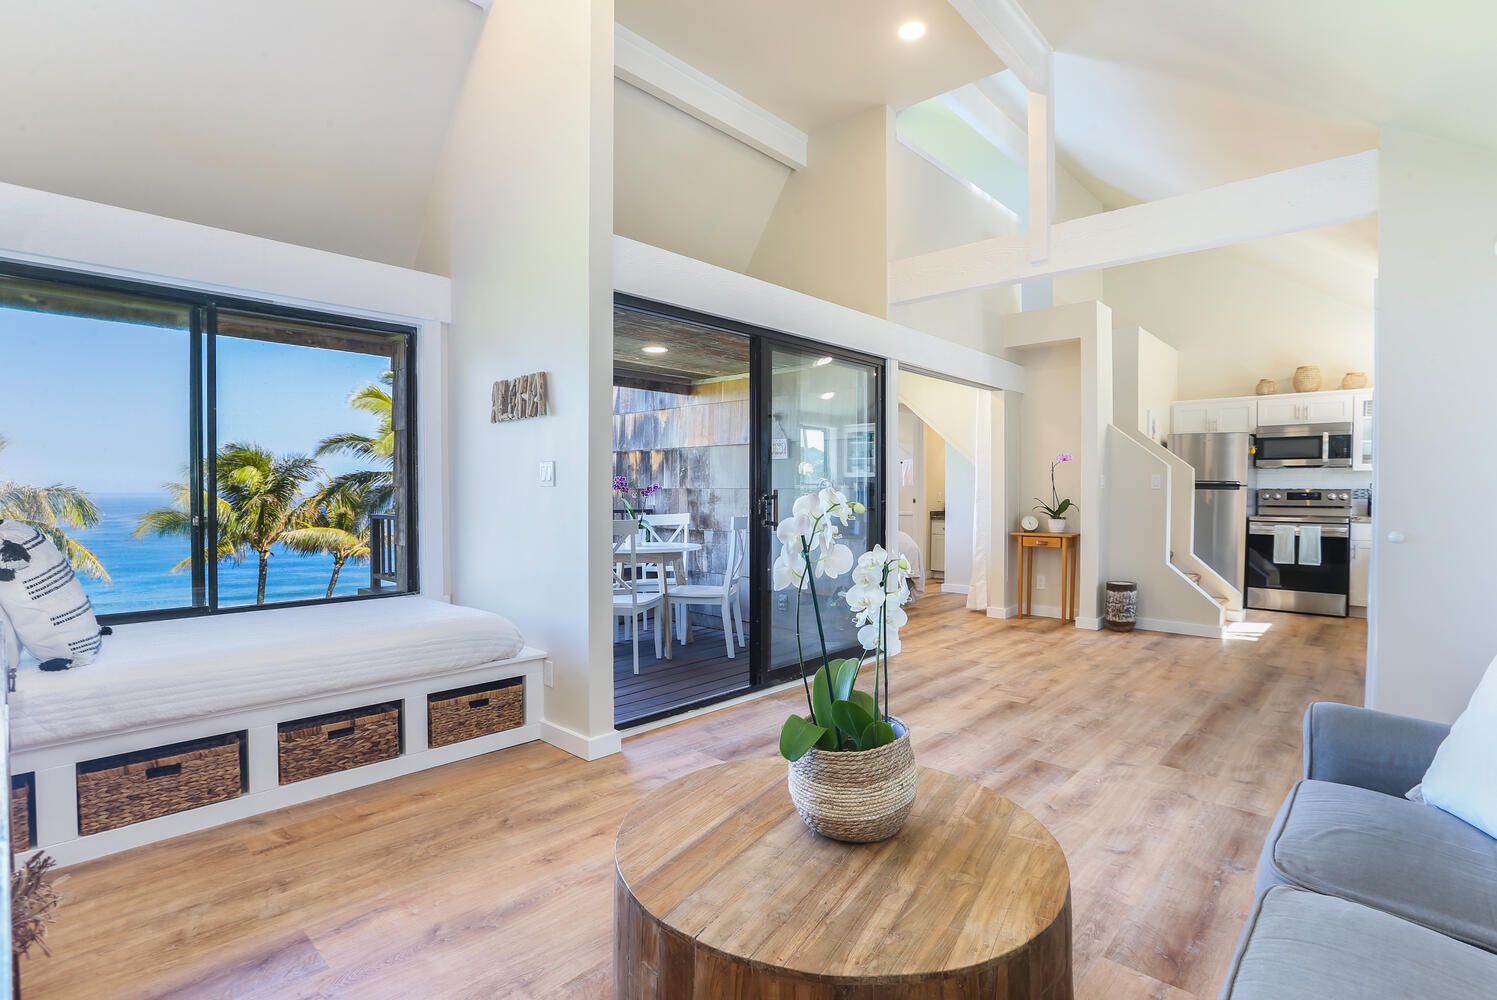 Princeville Vacation Rentals, Sealodge J8 - The open-concept floor plan makes for a seamless entertainment space